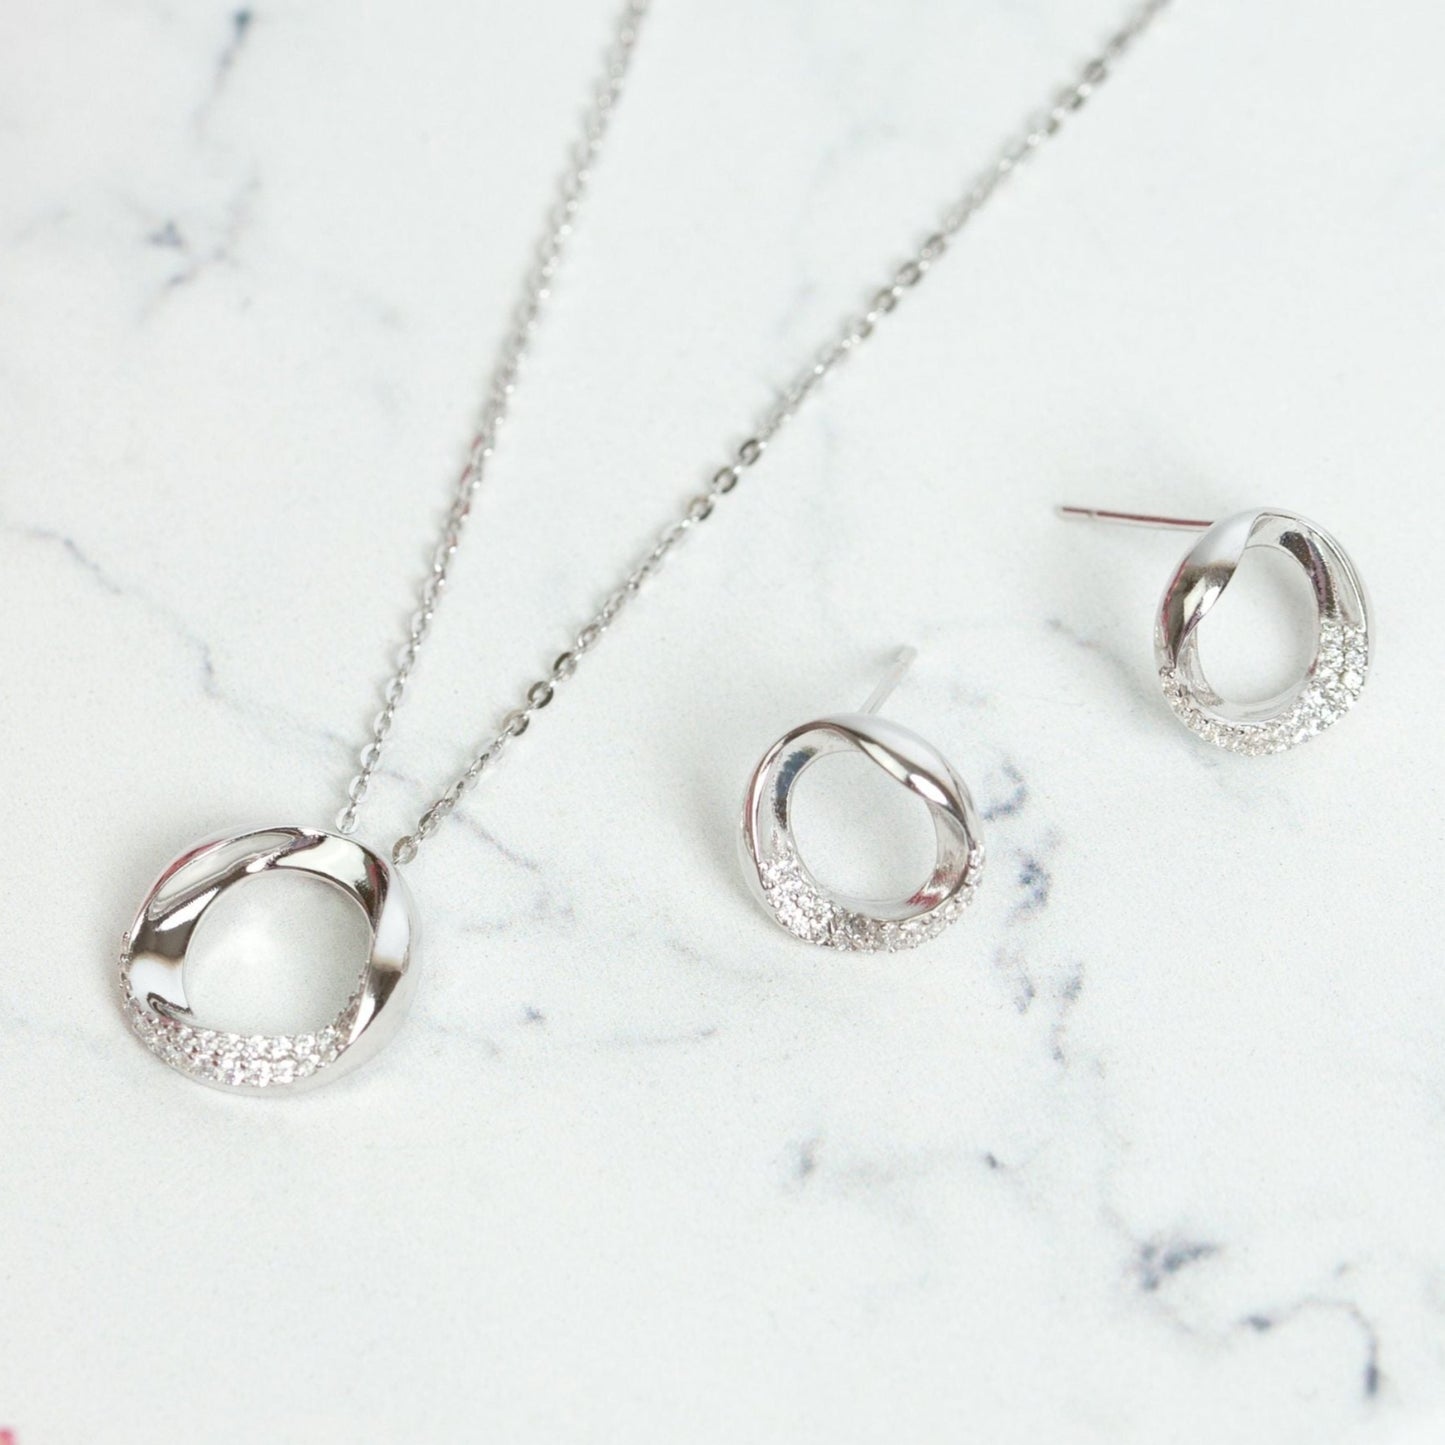 Crystal Ring Necklace